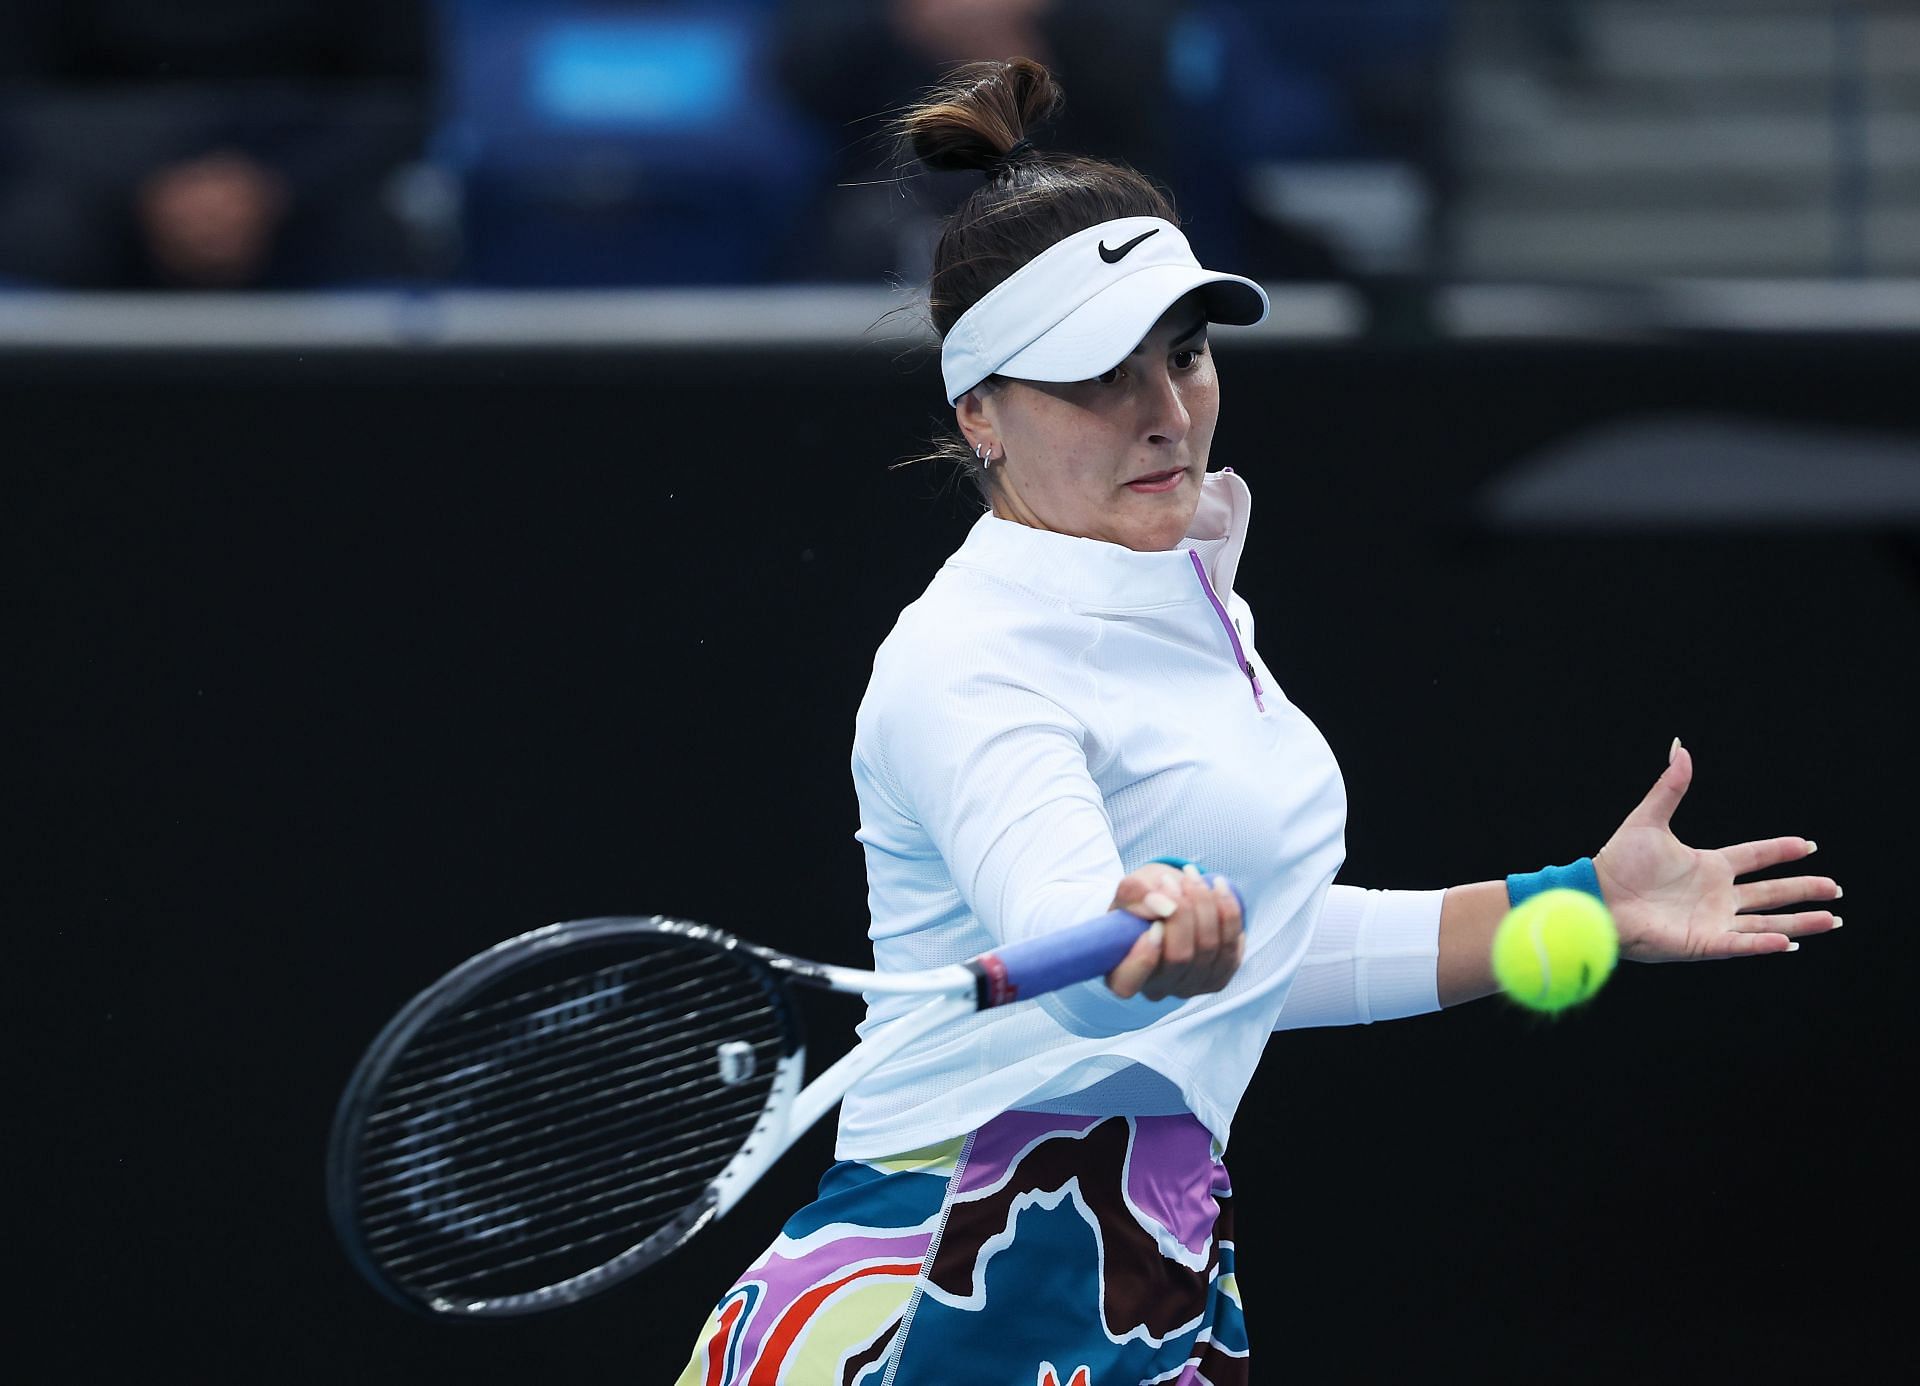 Bianca Andreescu in action at the 2023 Australian Open.